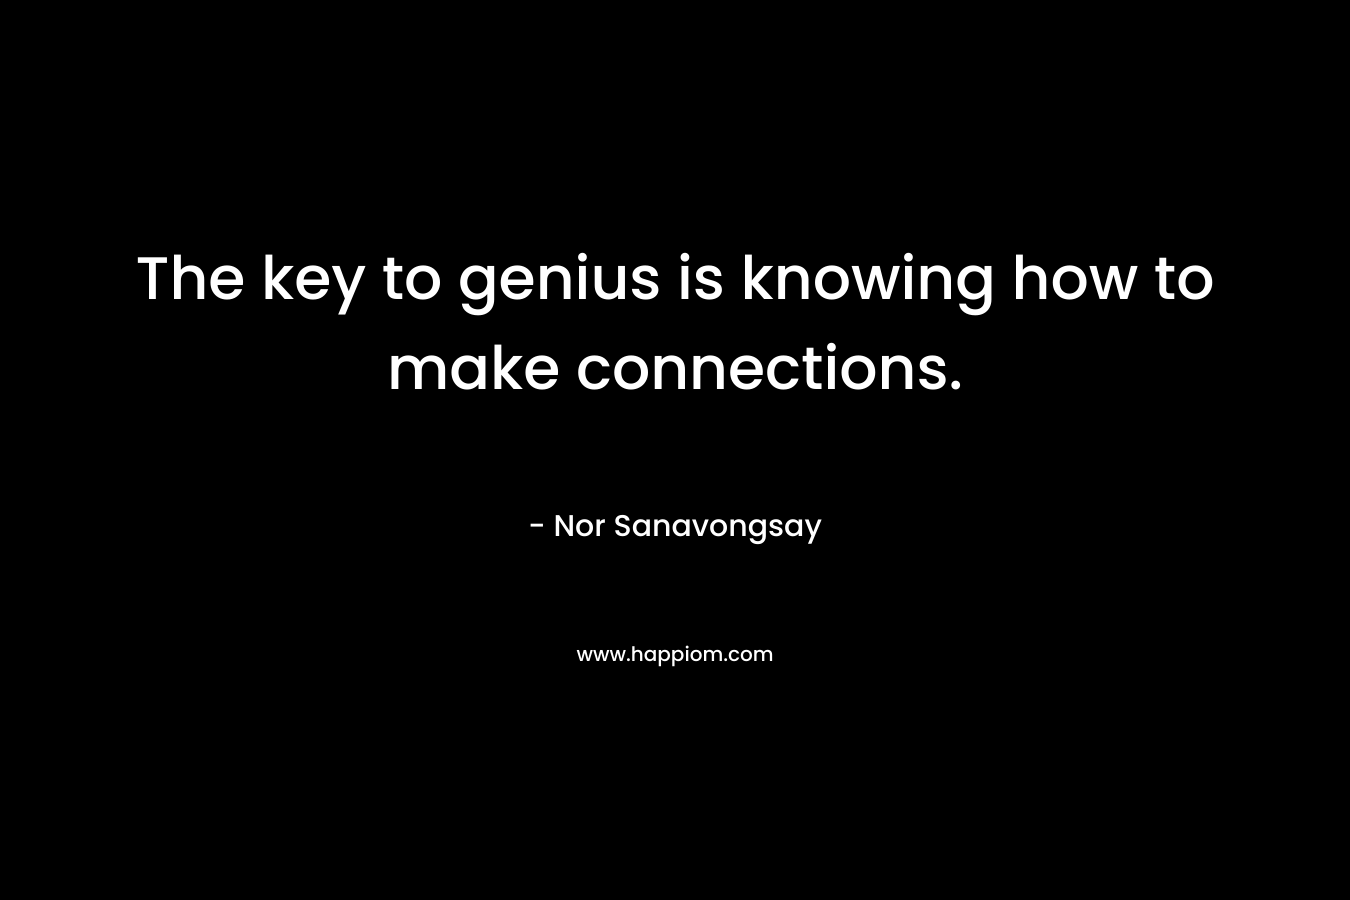 The key to genius is knowing how to make connections. – Nor Sanavongsay